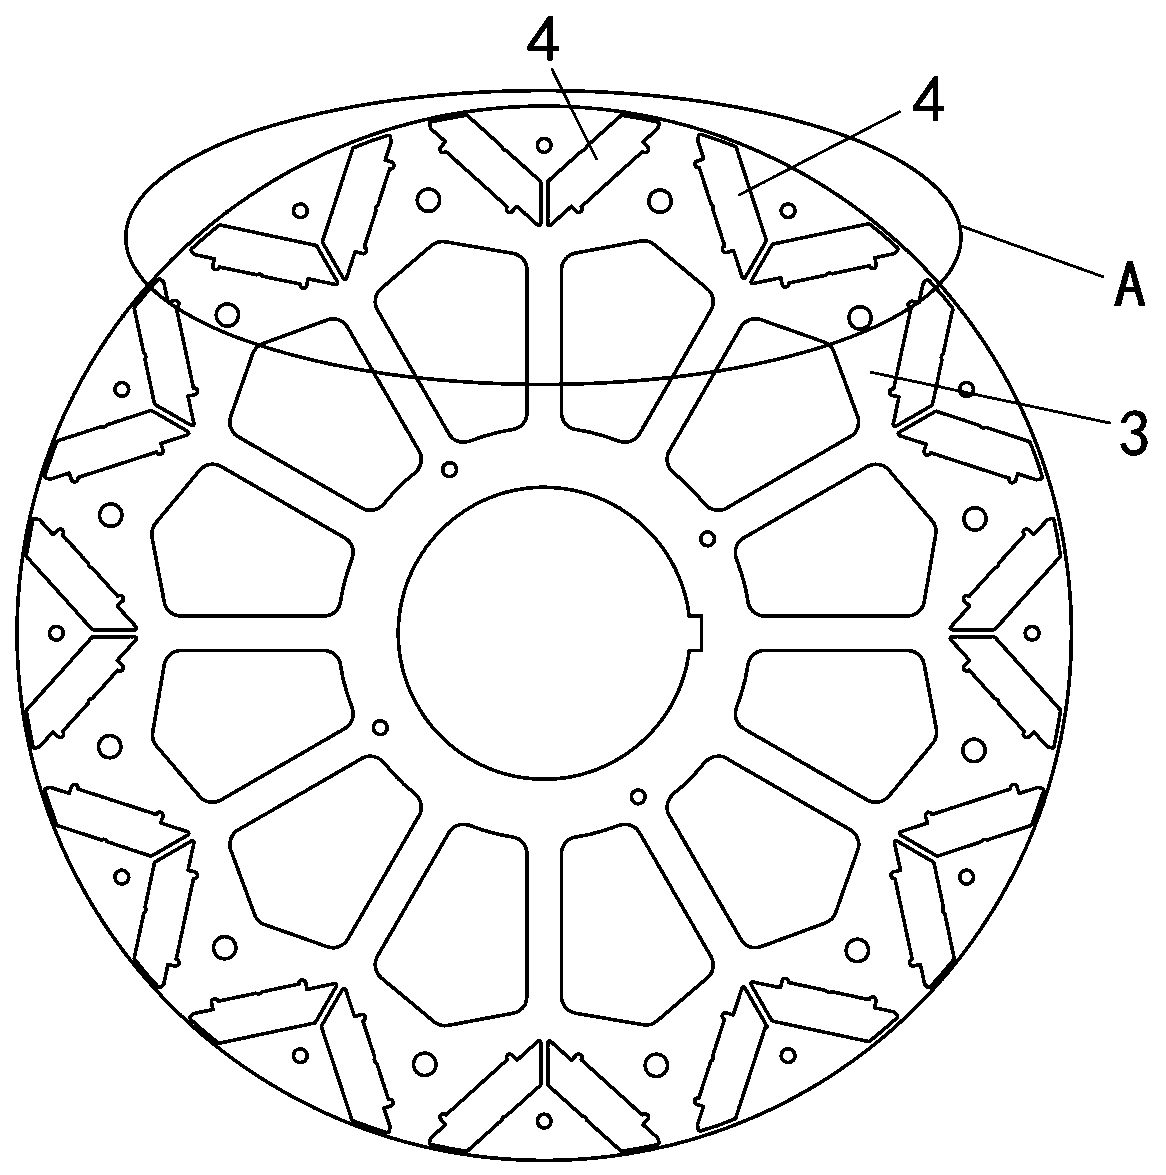 Mounting structure of rotor iron core and magnetic steel